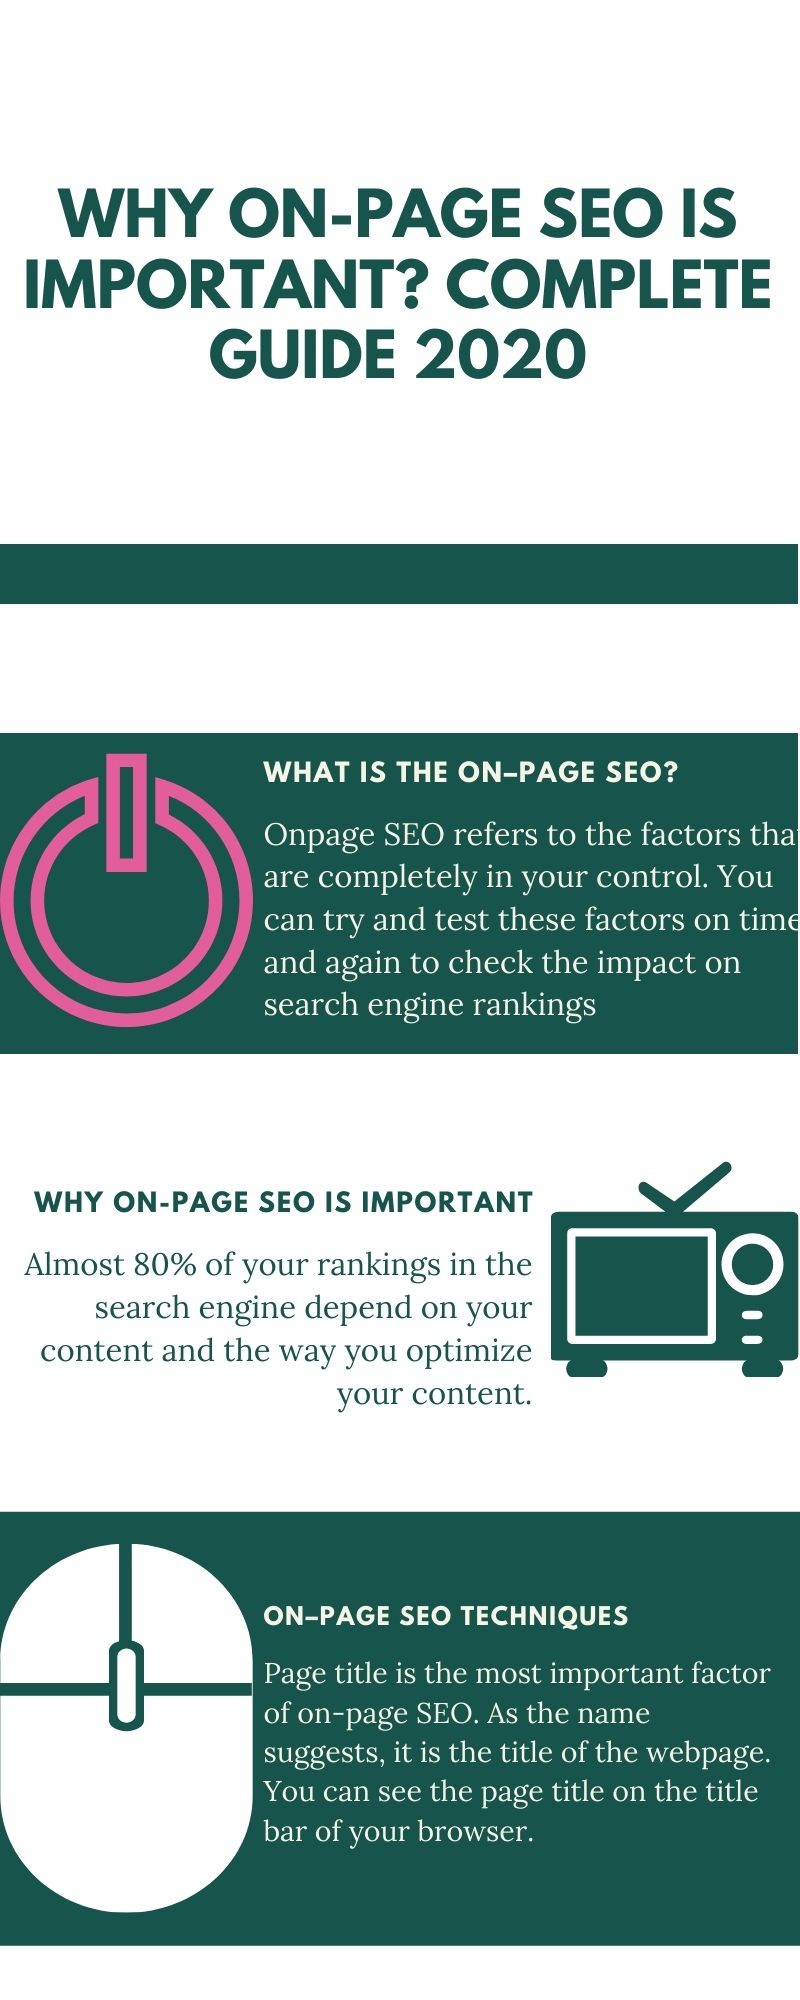 Why On-page SEO is Important? complete guide 2020